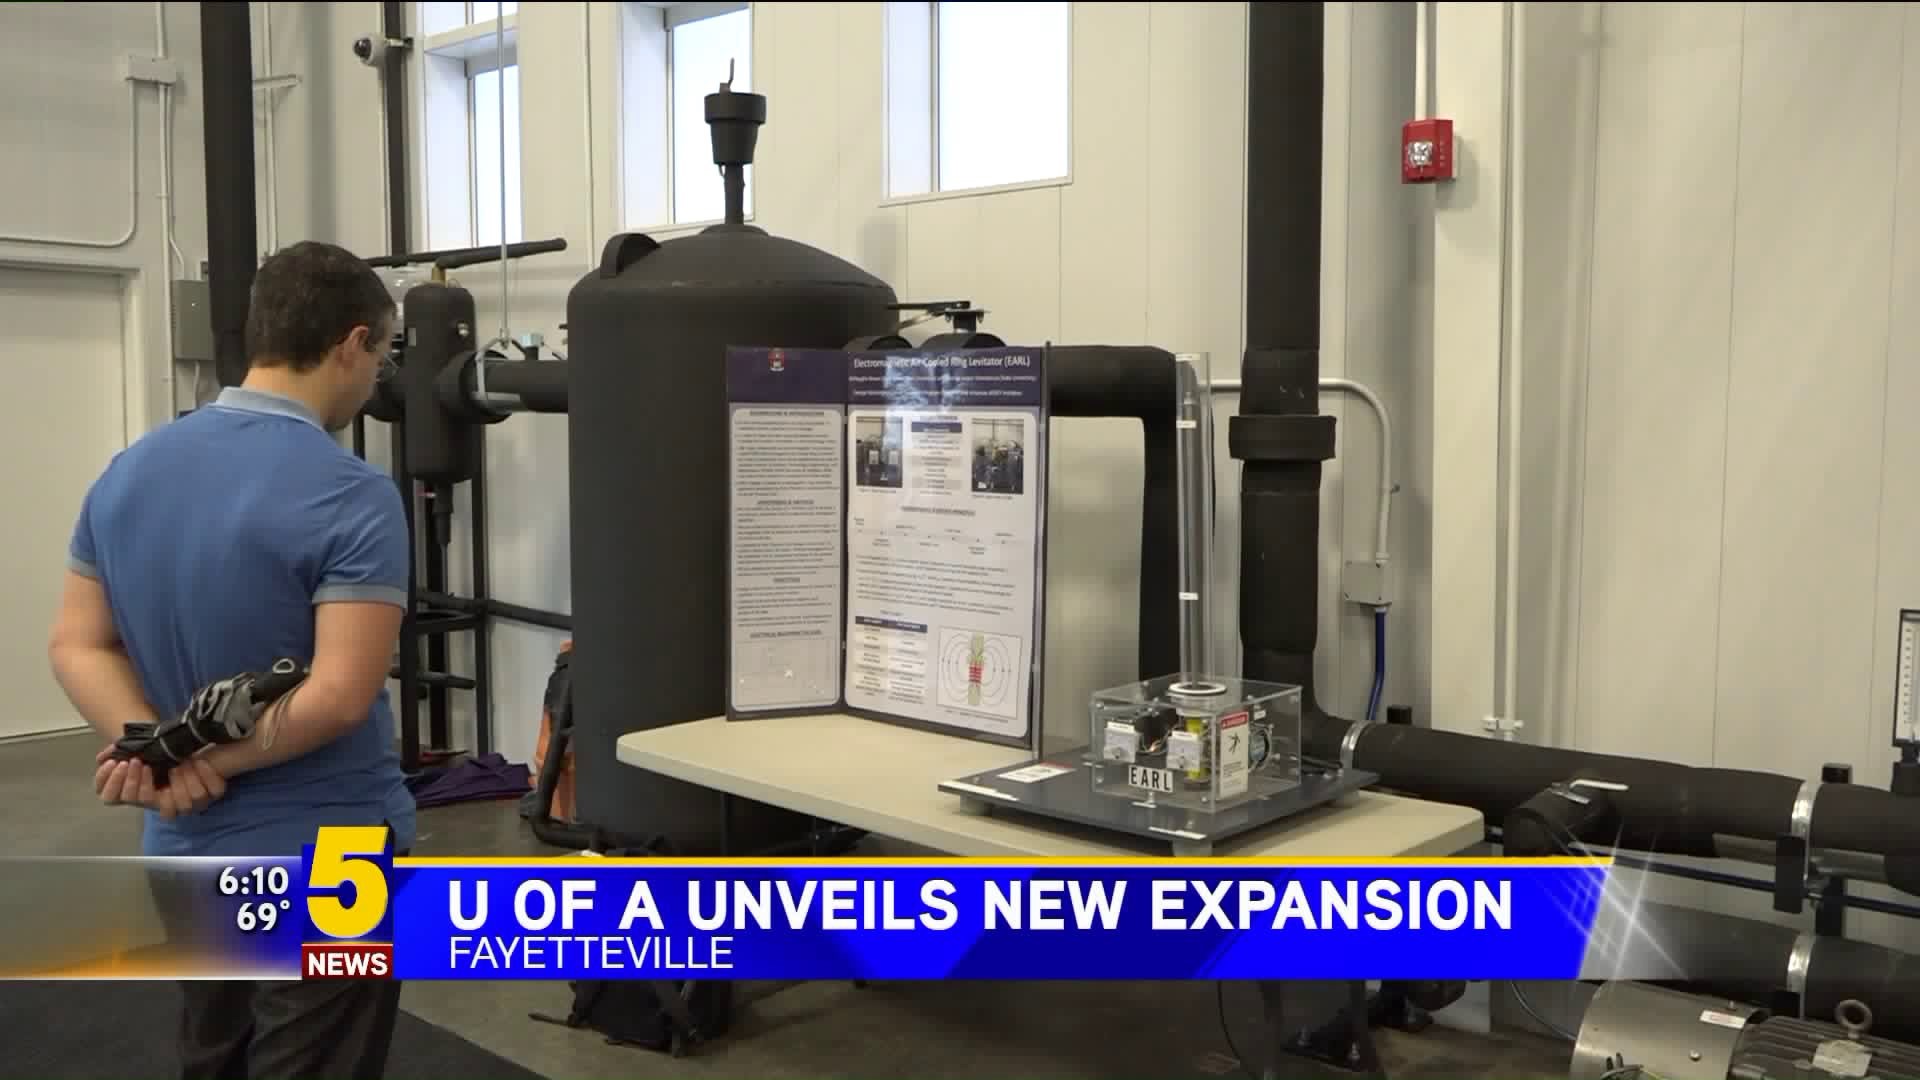 U of A Unveils New Expansion